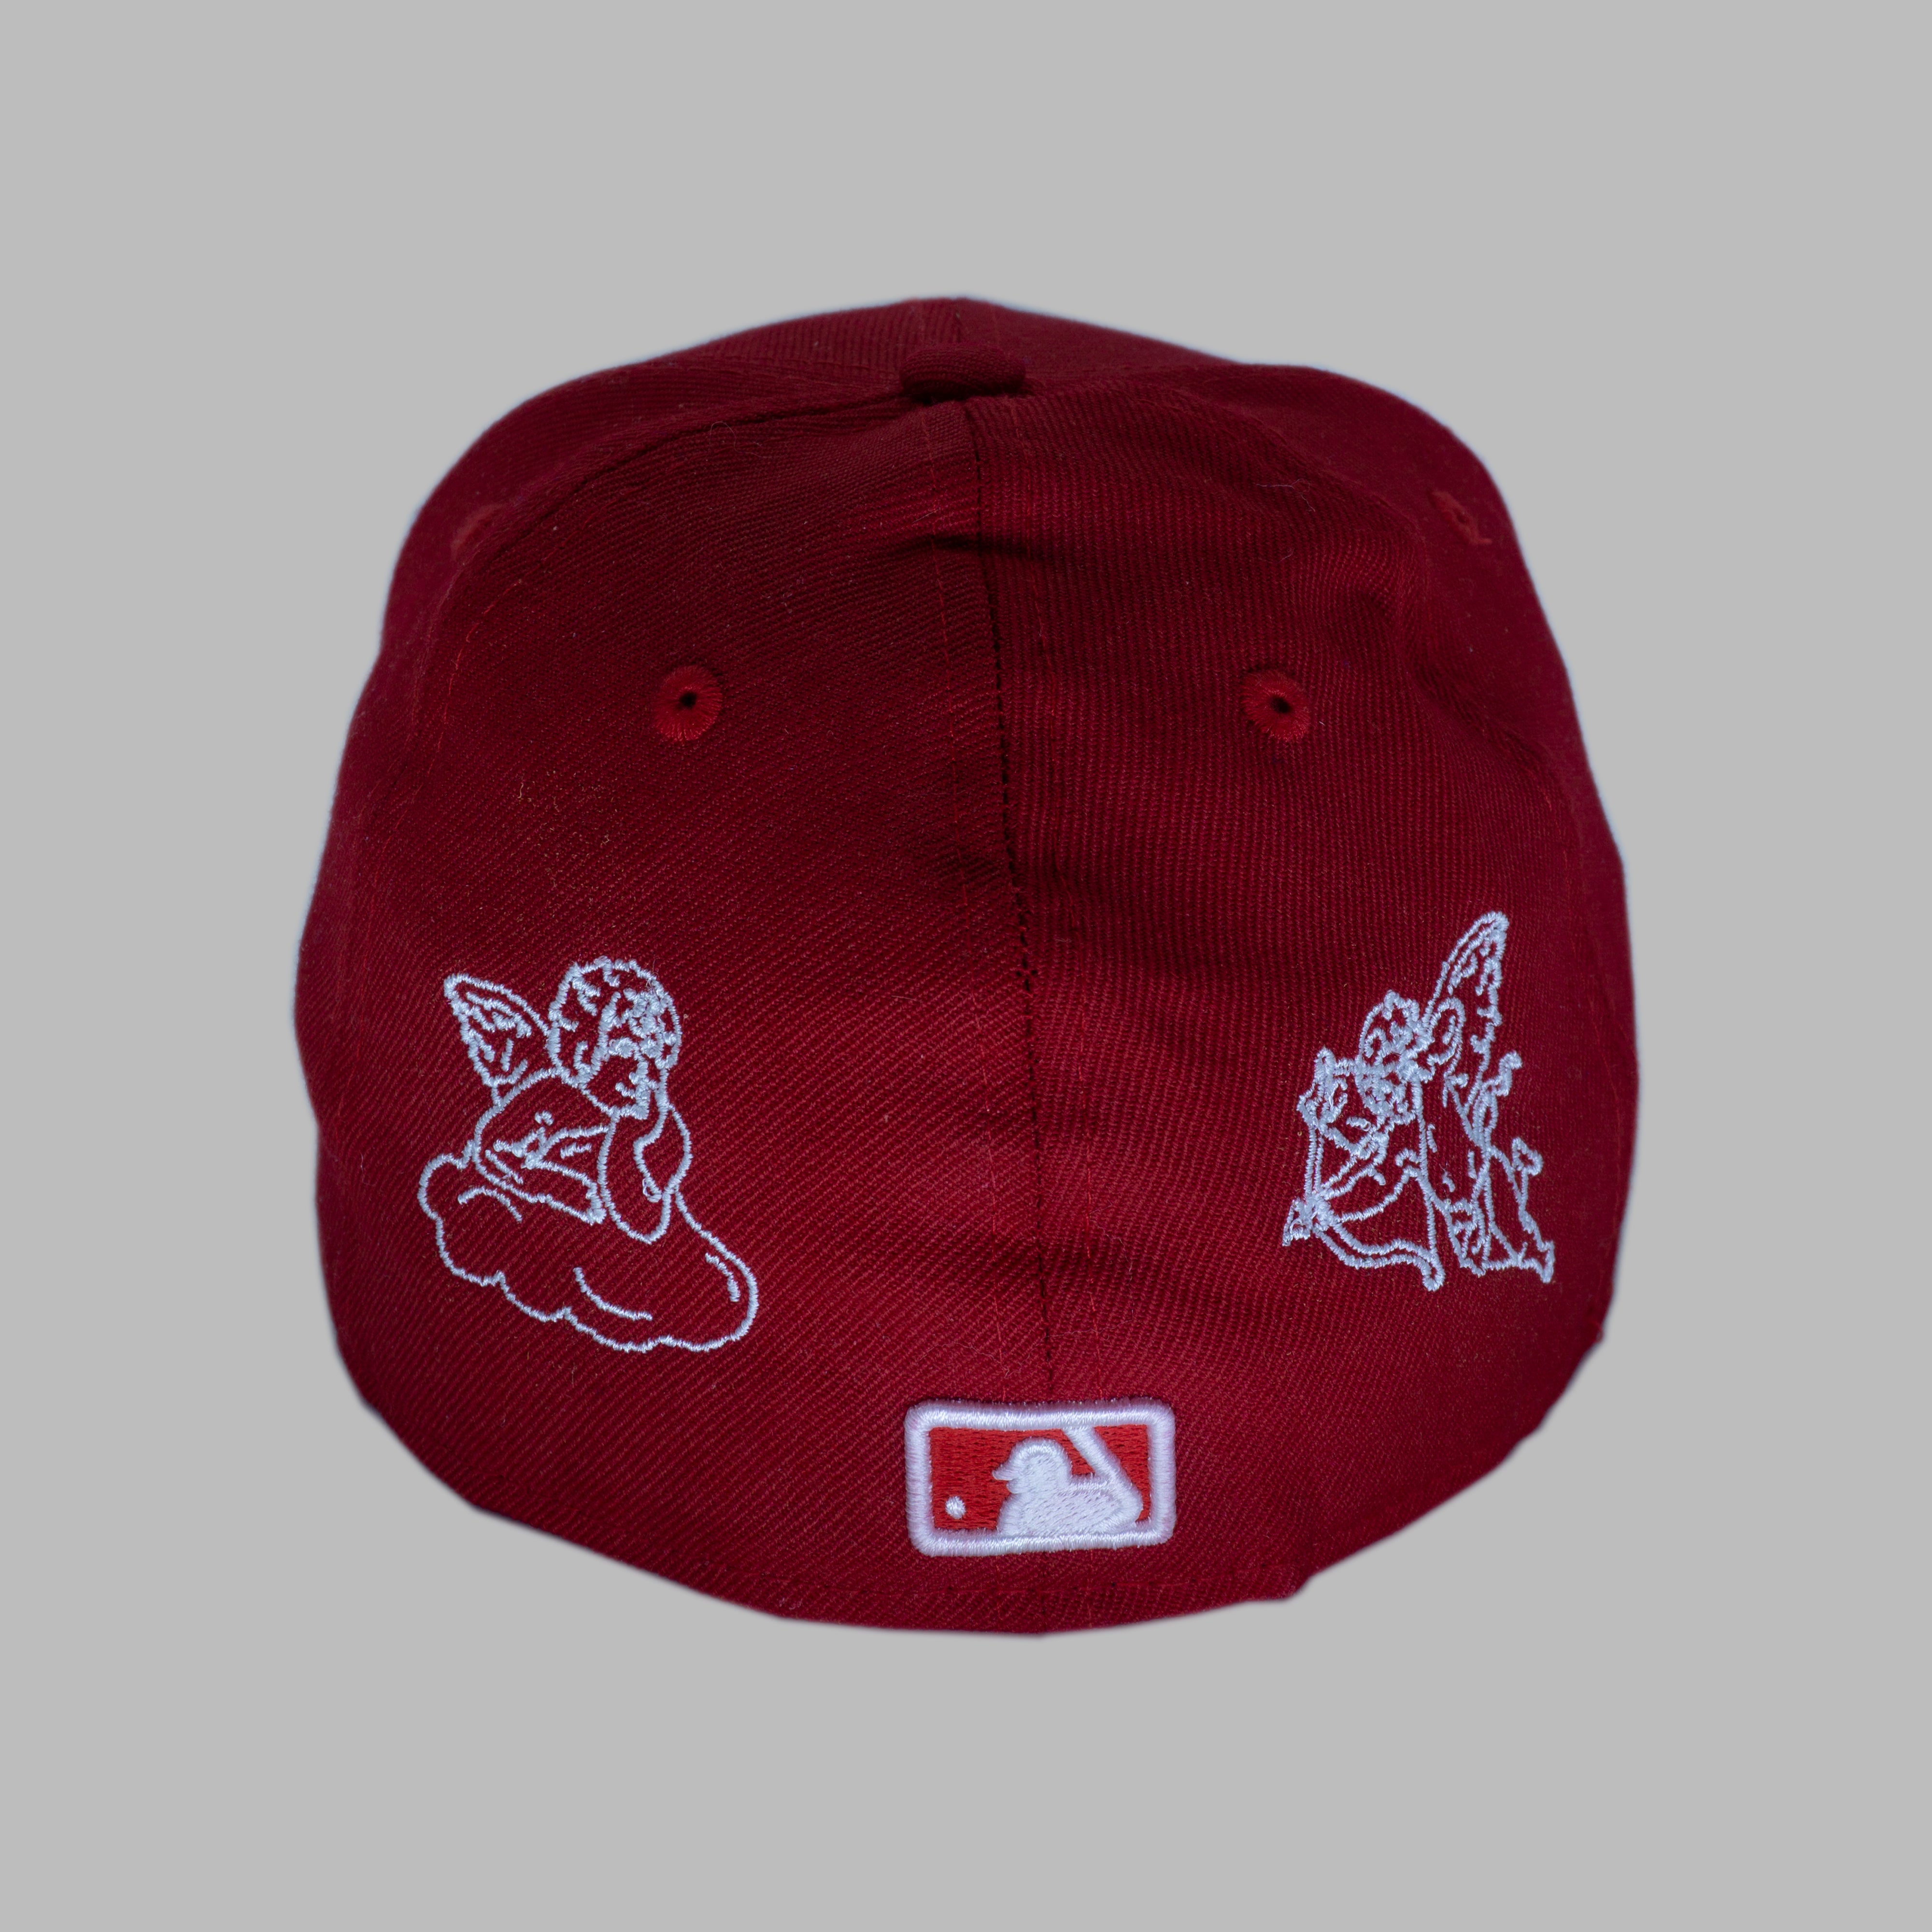 RED HOLY FITTED (size 7 1/4)